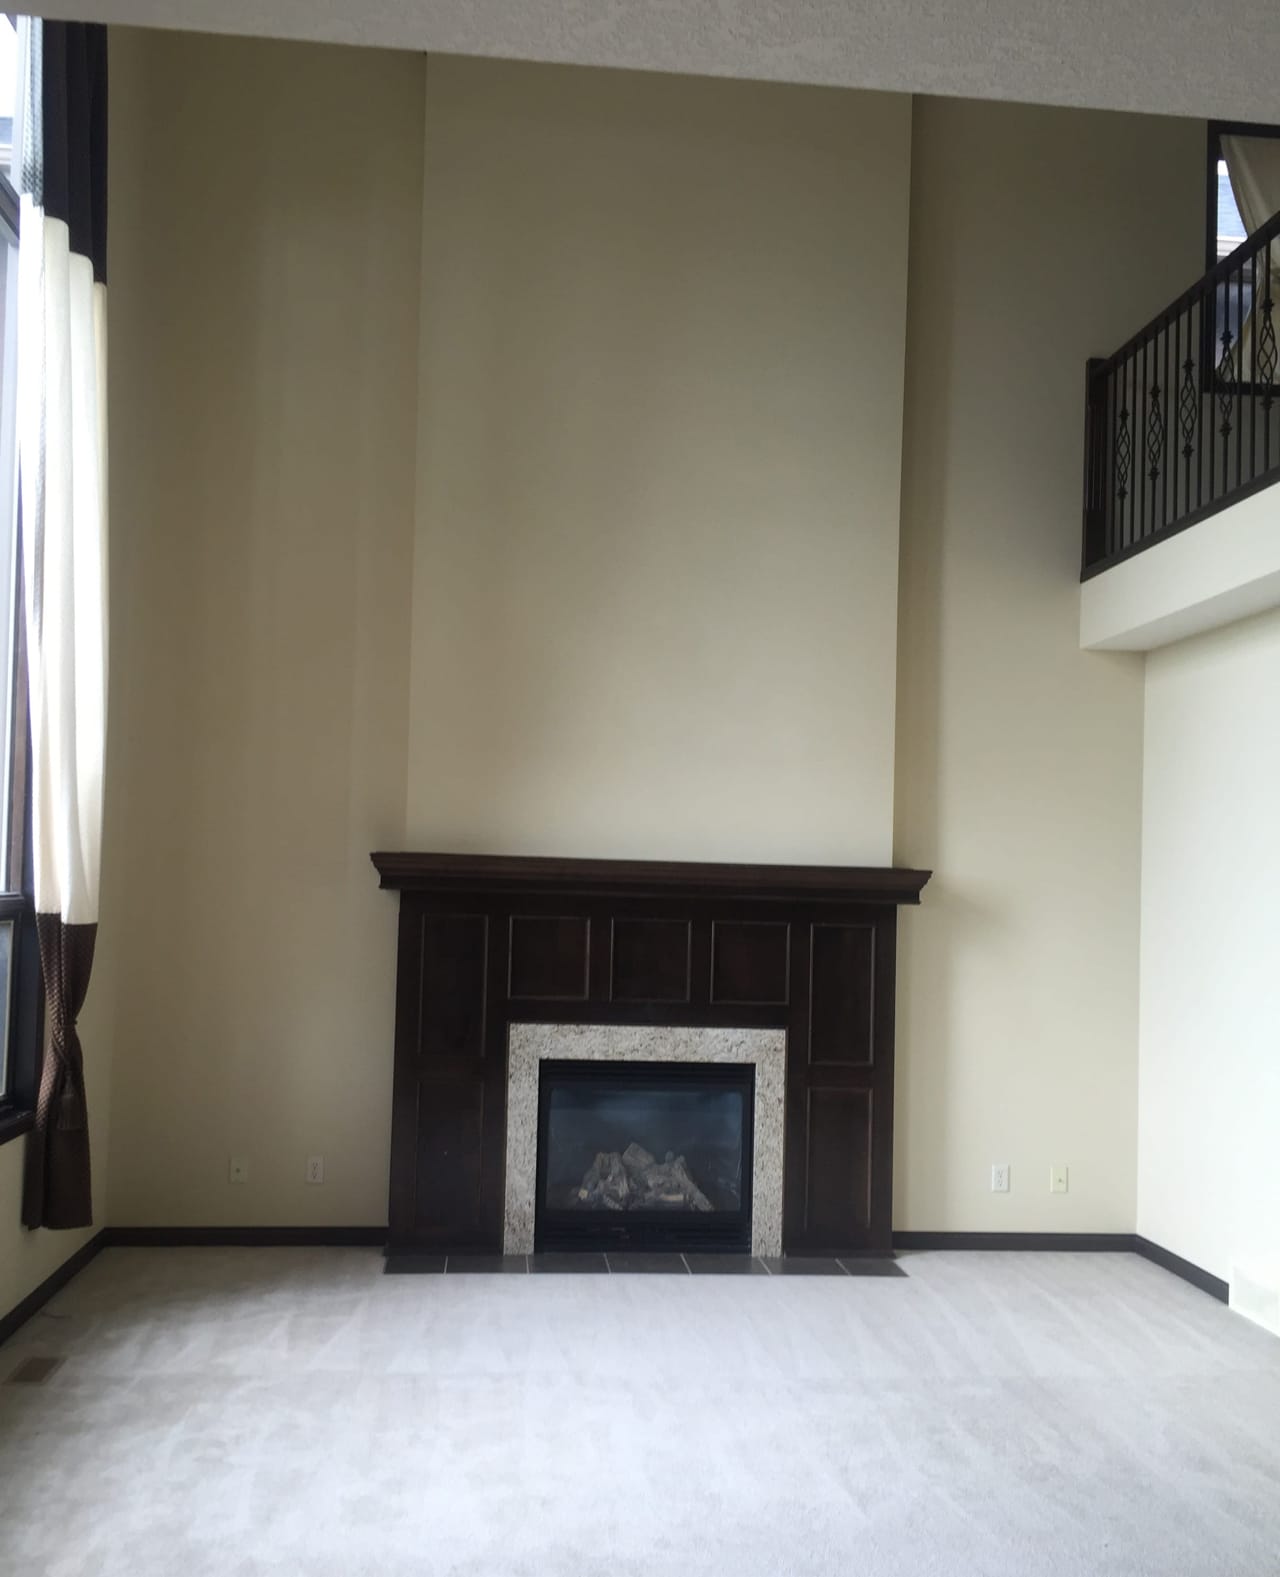 With the same wood stain as the kitchen cabinets, the old fireplace made the family room feel dark.